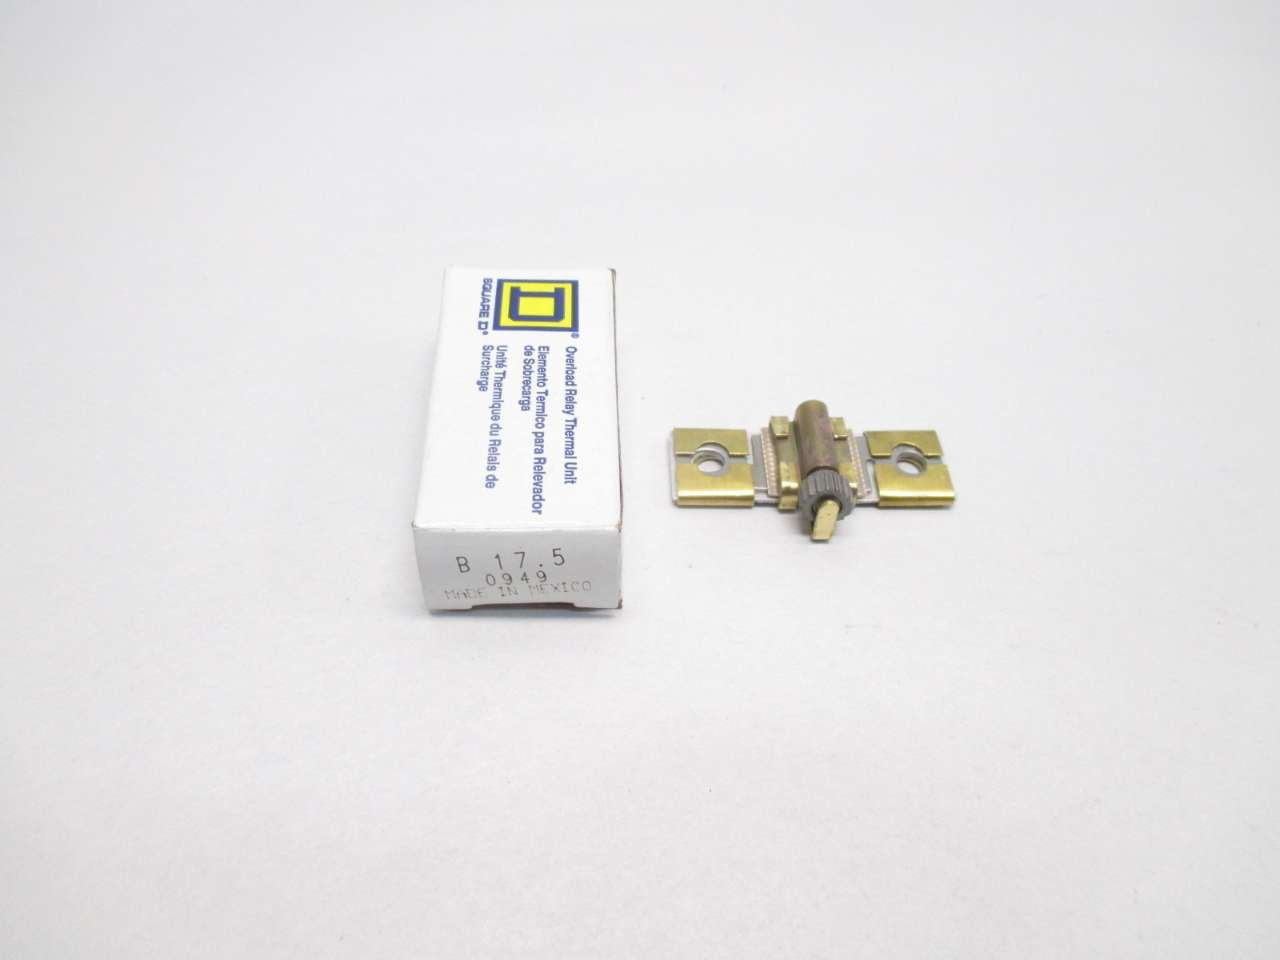 2 Square D B1.88 B Overload Relay THERMAL UNIT heater 